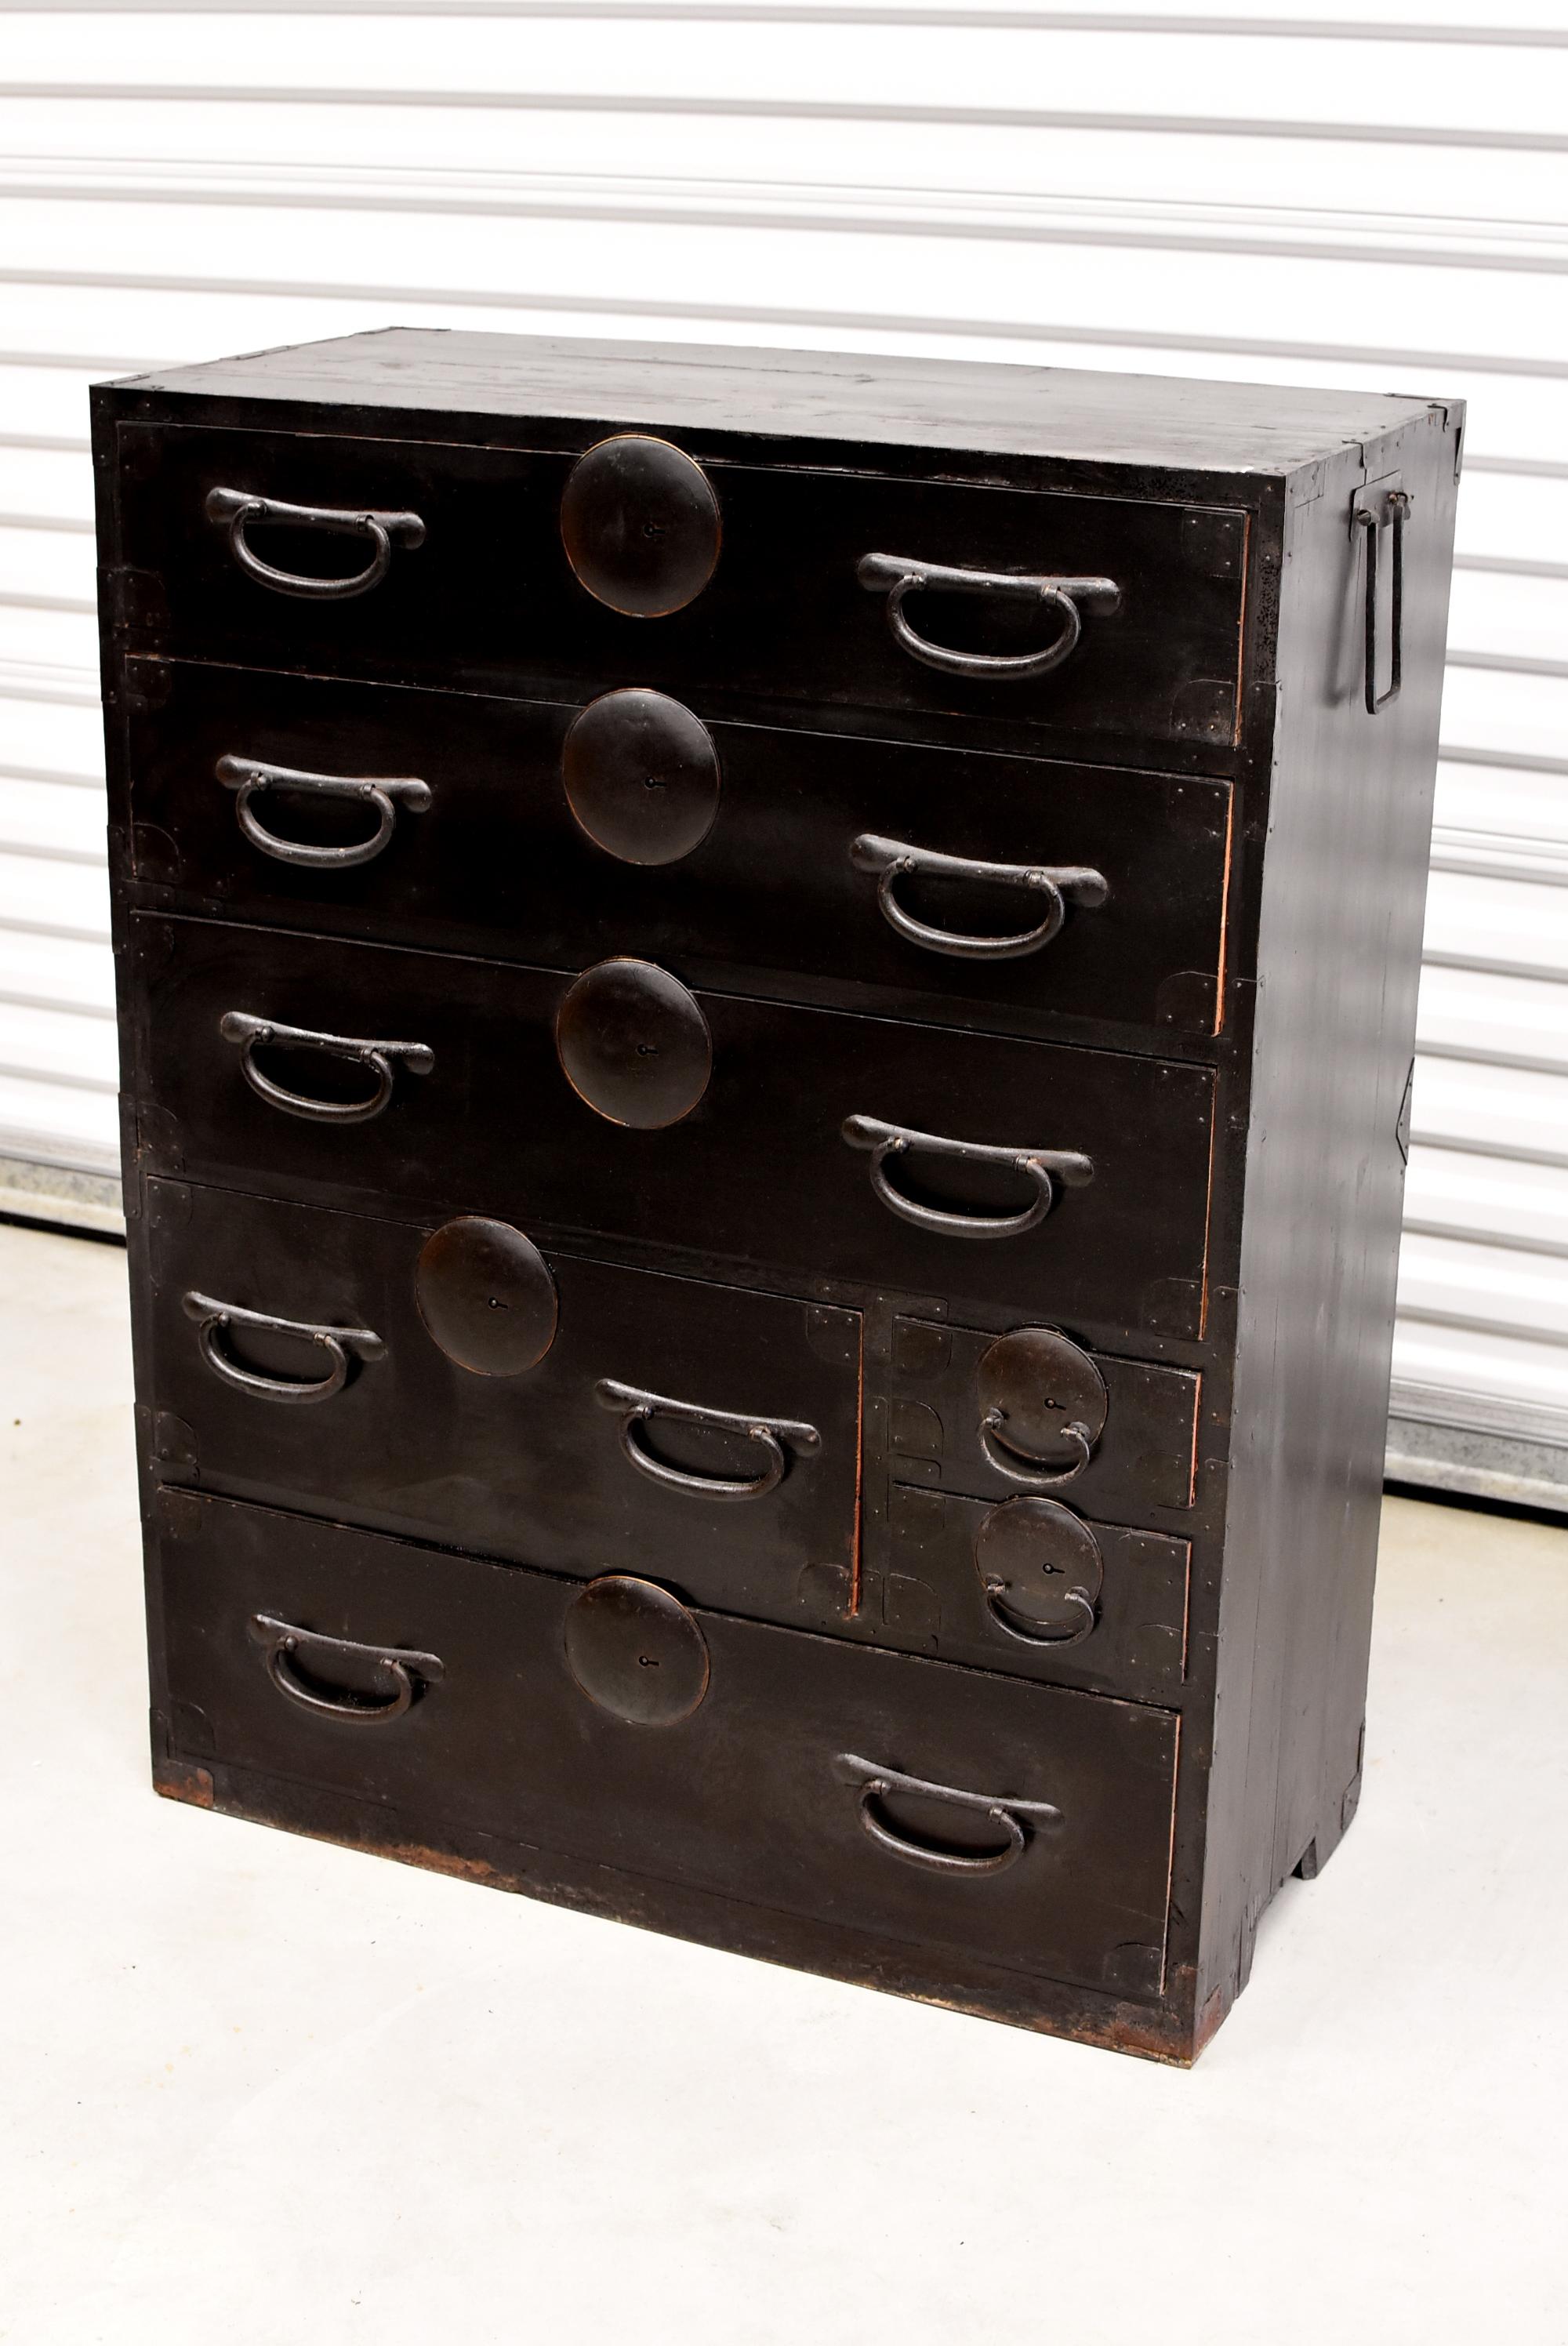 A beautiful vintage, Meiji Period, Japanese Tansu with seven full capacity drawers. Large, unique, solid iron and bronze hardware are simple and timeless. Side handles make moving a breeze. Solid wood. All original.
 